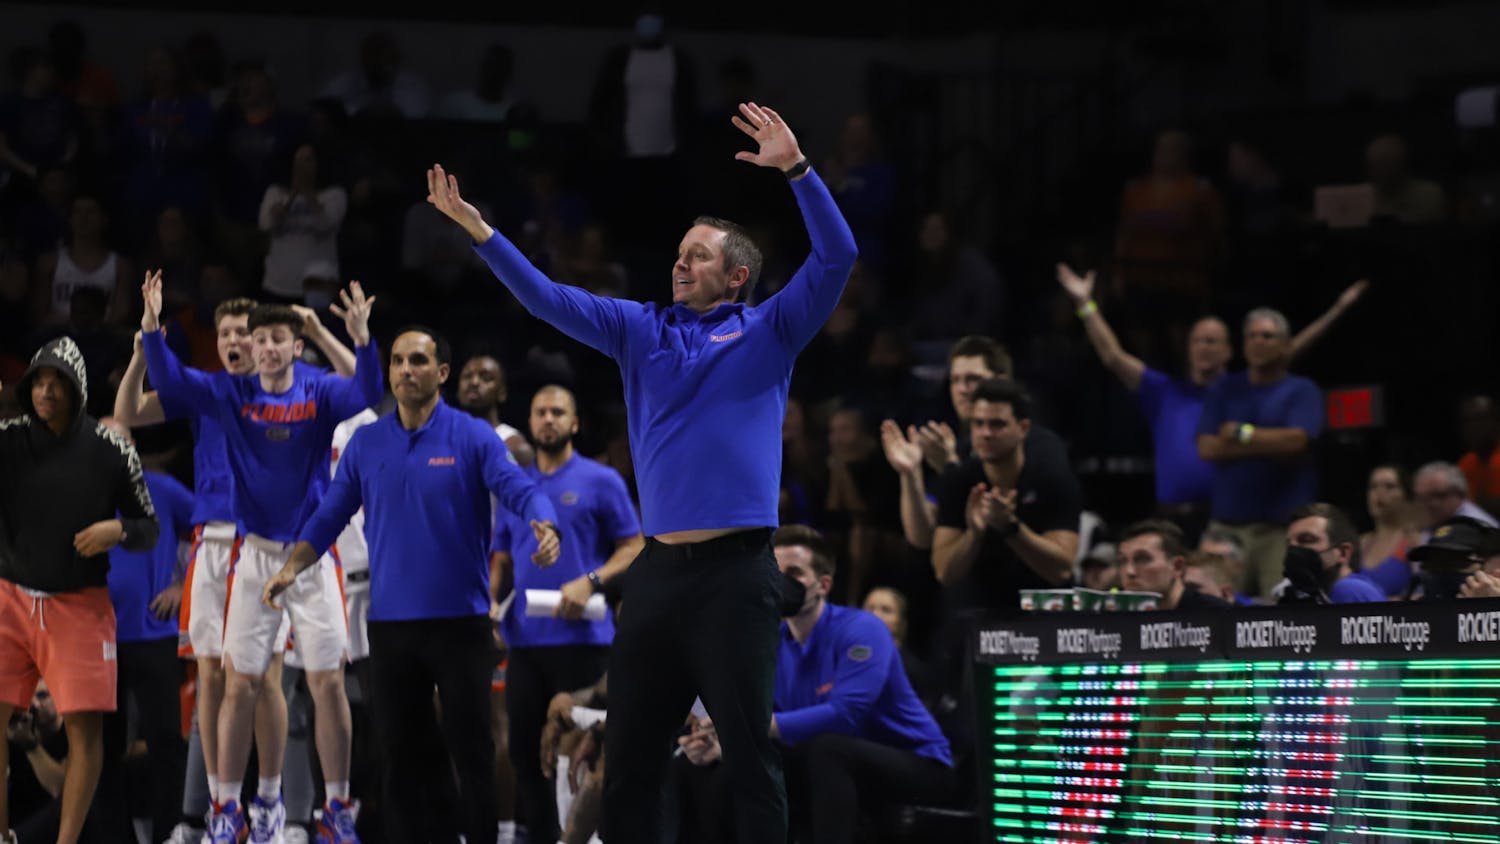 Gators head coach Mike White sends signals to his team during a Feb. 22 matchup with Arkansas. Florida lost in the second round of the SEC tournament 